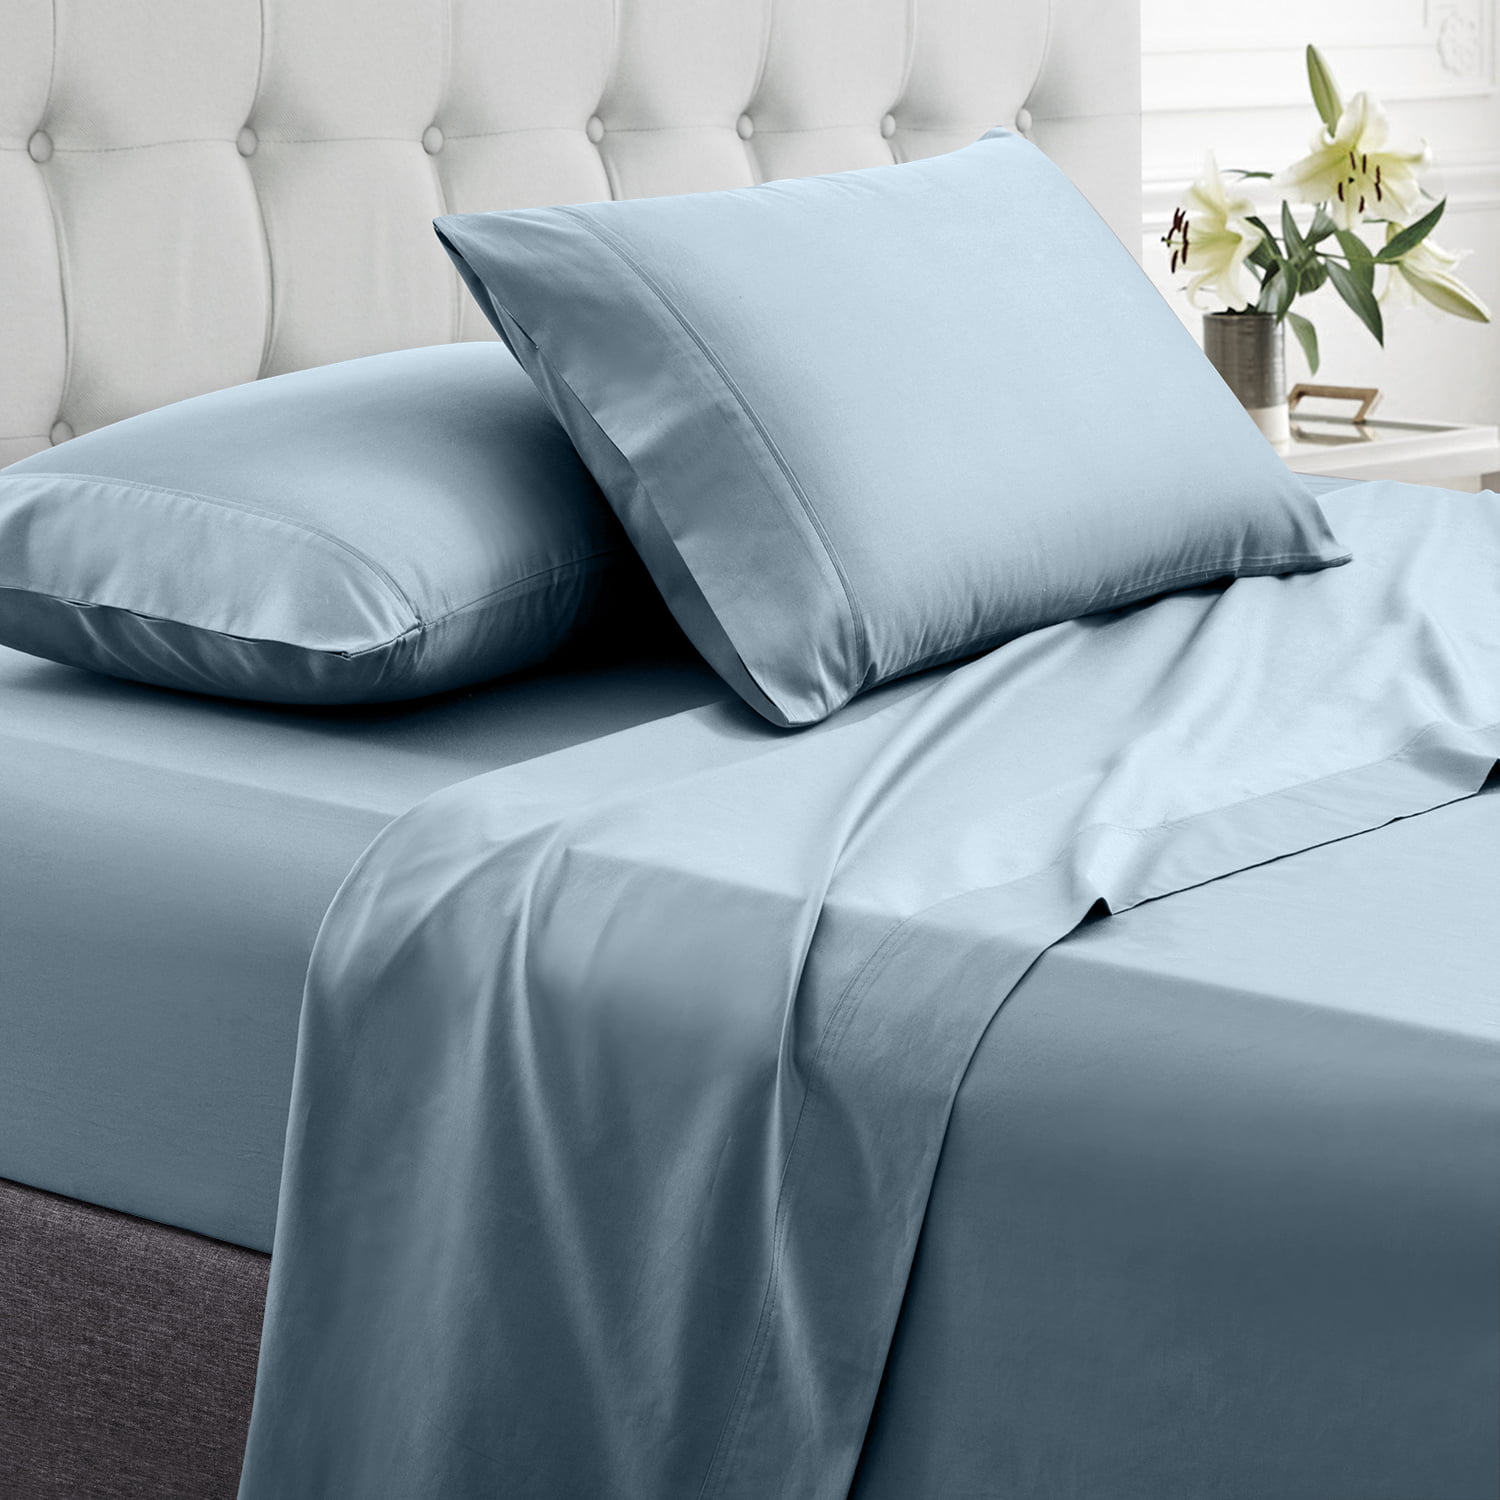 KING 50cm Cotton Polyester Percale Deep Wall Fitted Sheet 